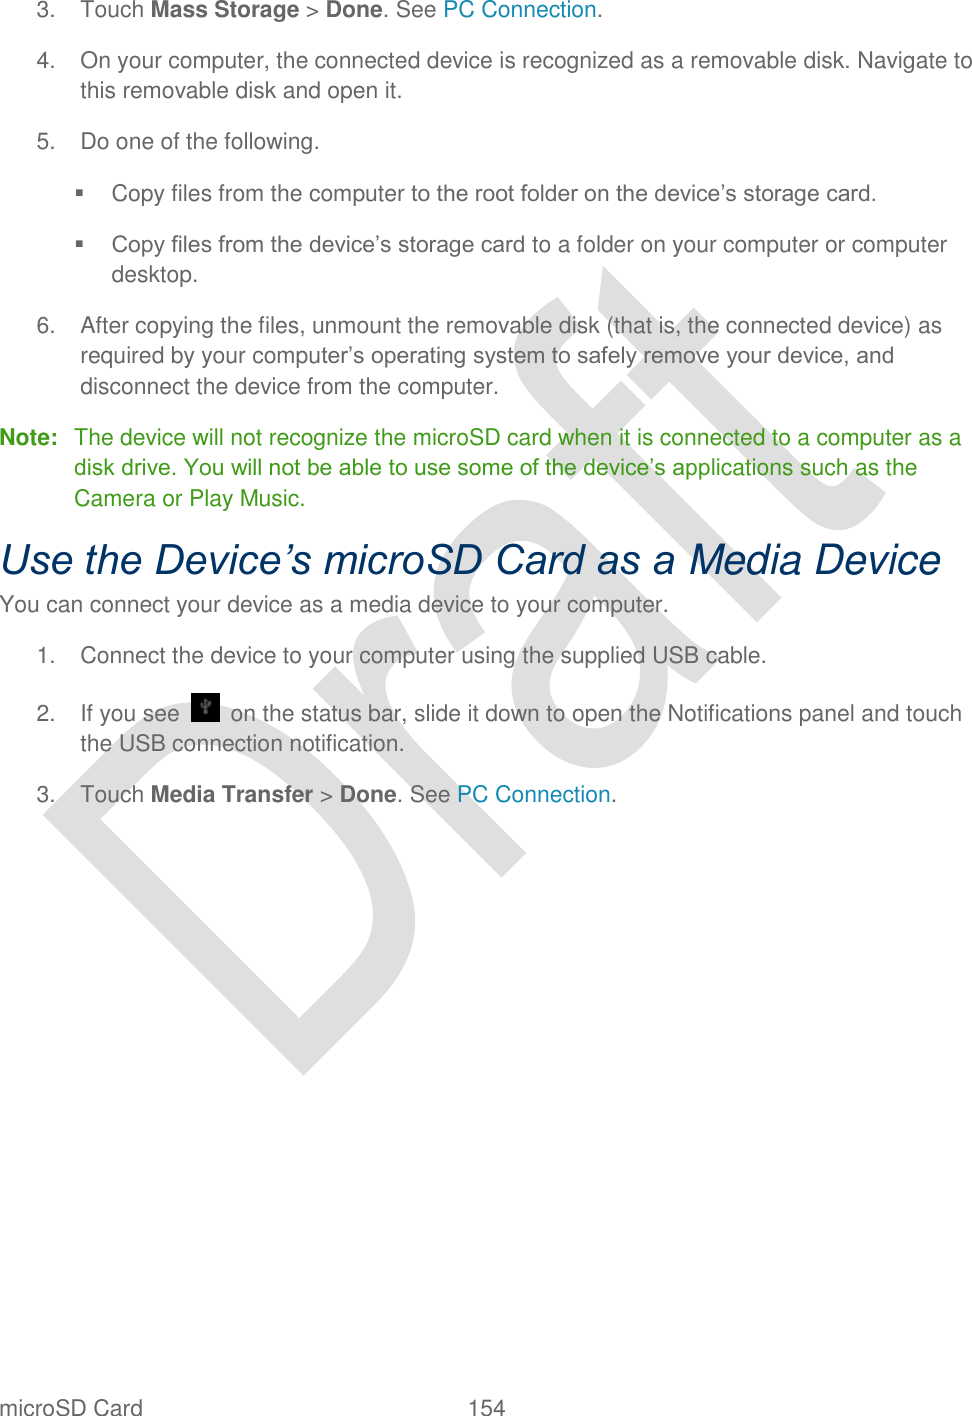  microSD Card  154   3.  Touch Mass Storage &gt; Done. See PC Connection.   4.  On your computer, the connected device is recognized as a removable disk. Navigate to this removable disk and open it. 5.  Do one of the following.   Copy files from the computer to the root folder on the device‟s storage card.  Copy files from the device‟s storage card to a folder on your computer or computer desktop. 6.  After copying the files, unmount the removable disk (that is, the connected device) as required by your computer‟s operating system to safely remove your device, and disconnect the device from the computer.   Note:  The device will not recognize the microSD card when it is connected to a computer as a disk drive. You will not be able to use some of the device‟s applications such as the Camera or Play Music. Use the Device’s microSD Card as a Media Device You can connect your device as a media device to your computer. 1.  Connect the device to your computer using the supplied USB cable. 2.  If you see    on the status bar, slide it down to open the Notifications panel and touch the USB connection notification. 3.  Touch Media Transfer &gt; Done. See PC Connection.    